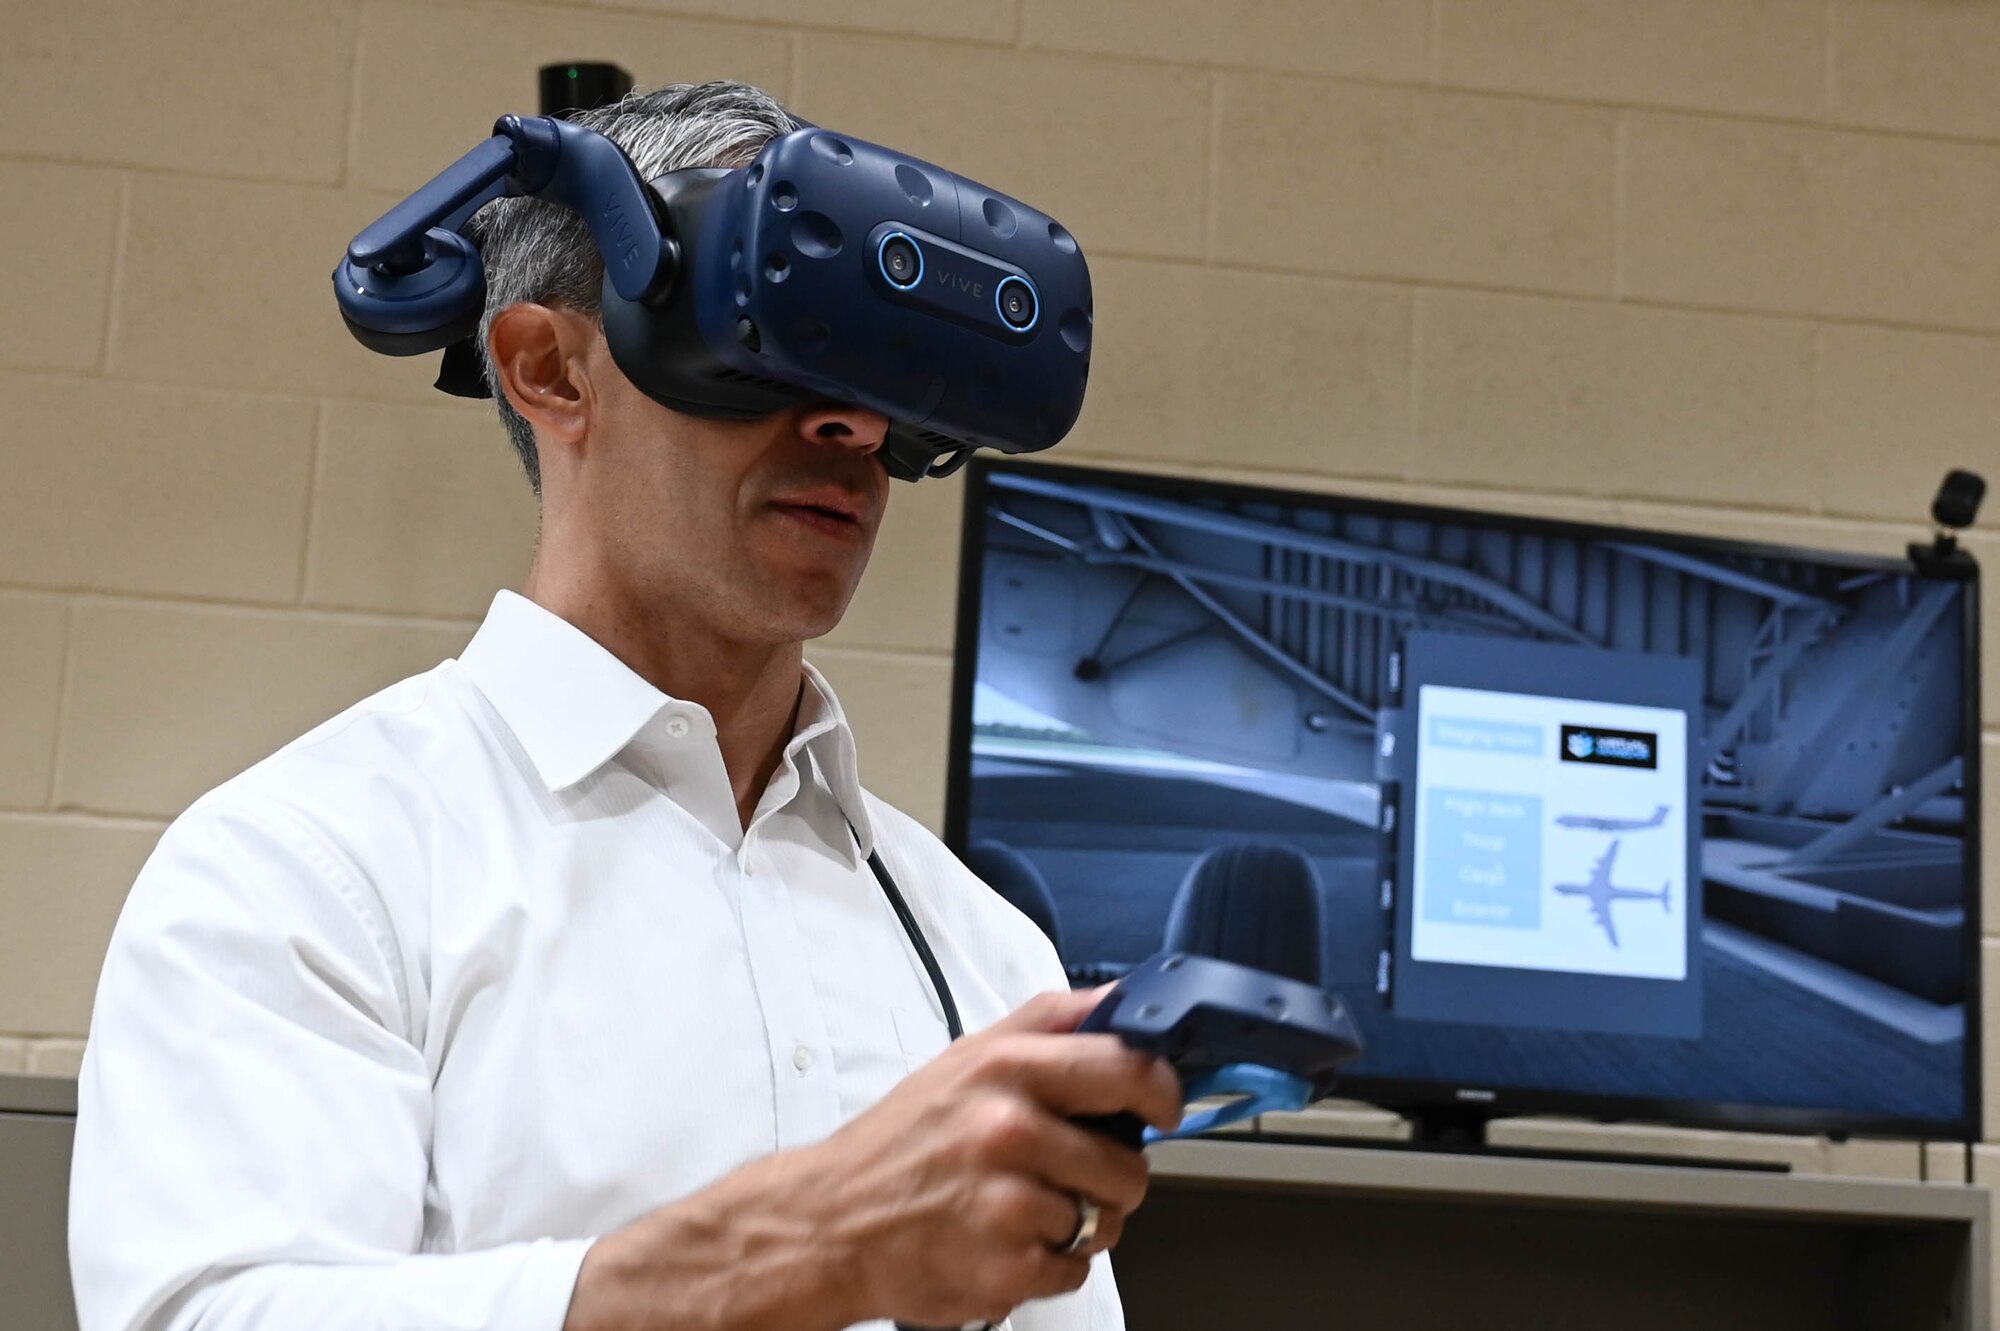 Roy Nirenberg, San Antonio mayor, participates in a virtual reality C-5M Super Galaxy program at Joint Base San Antonio, Texas, Aug. 6, 2022. The 2022 honorary commanders toured the 433rd Operations Group seeing its mission sets. (U.S. Air Force photo by Senior Airman Brittany Wich)